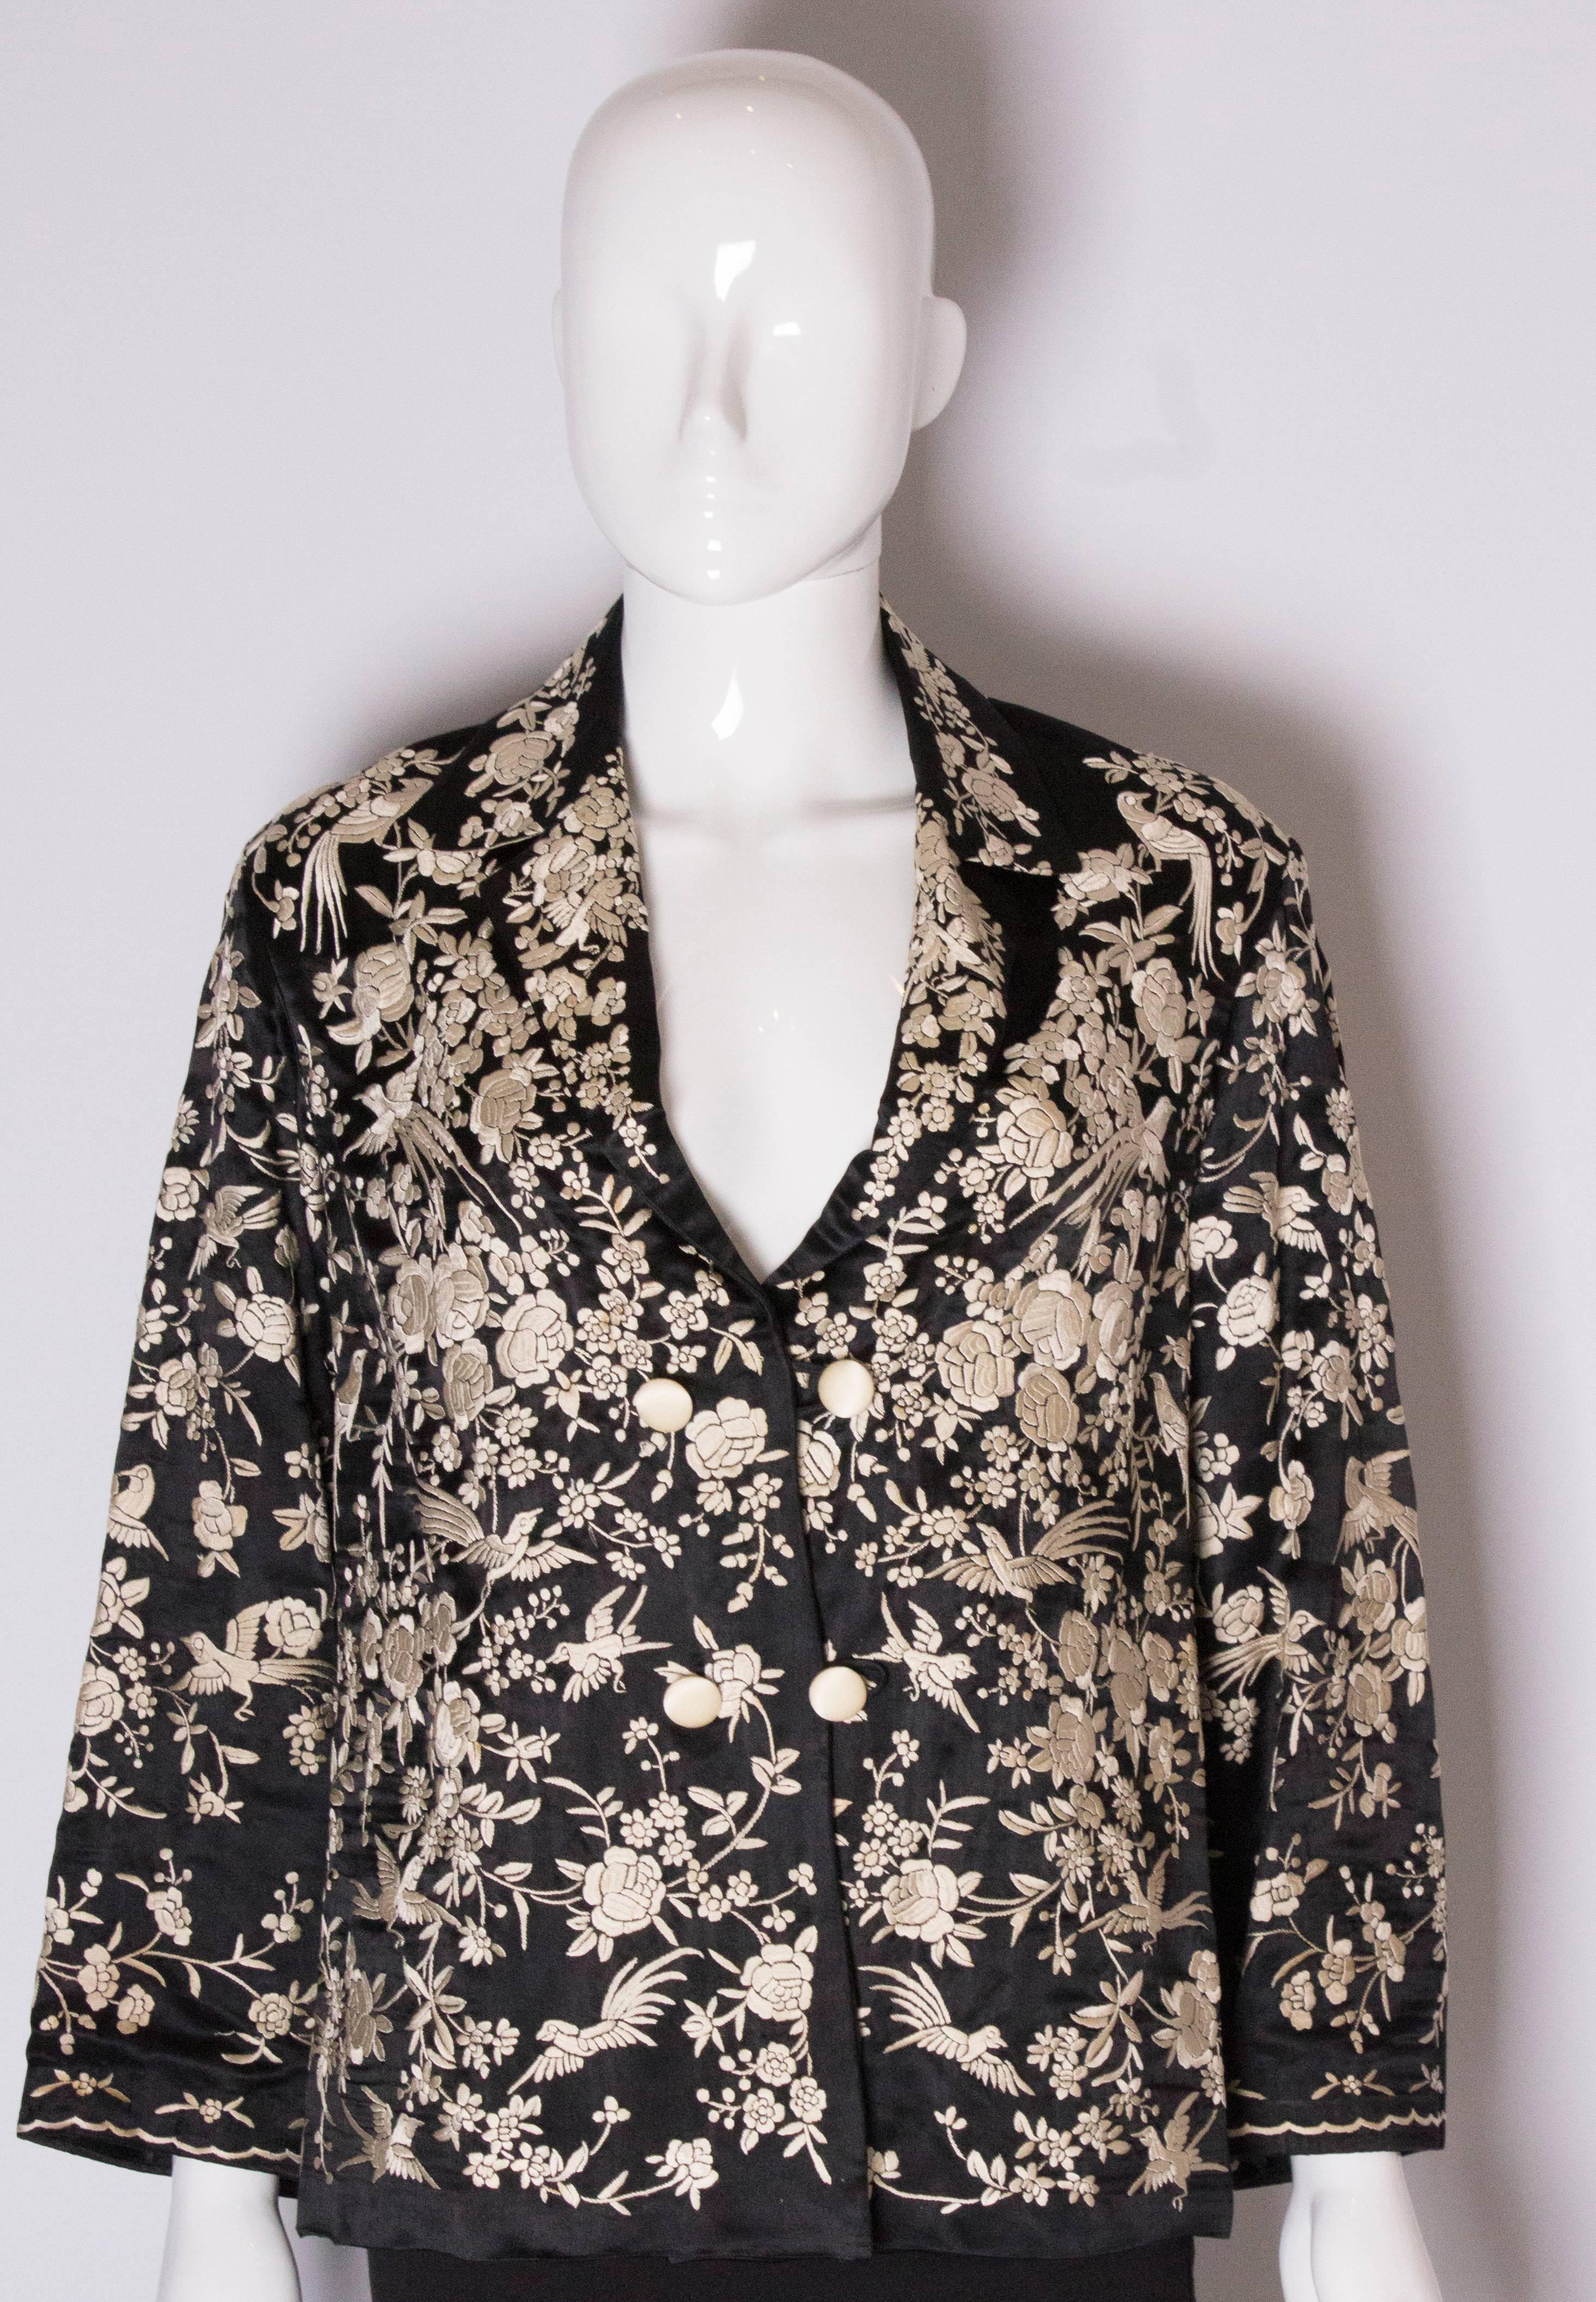 A chic Chinese jacket  in black silk with white embroidery , in a bird and flower design.
The jacket has a cutaway collar and two button fastening, and is lined in white silk.